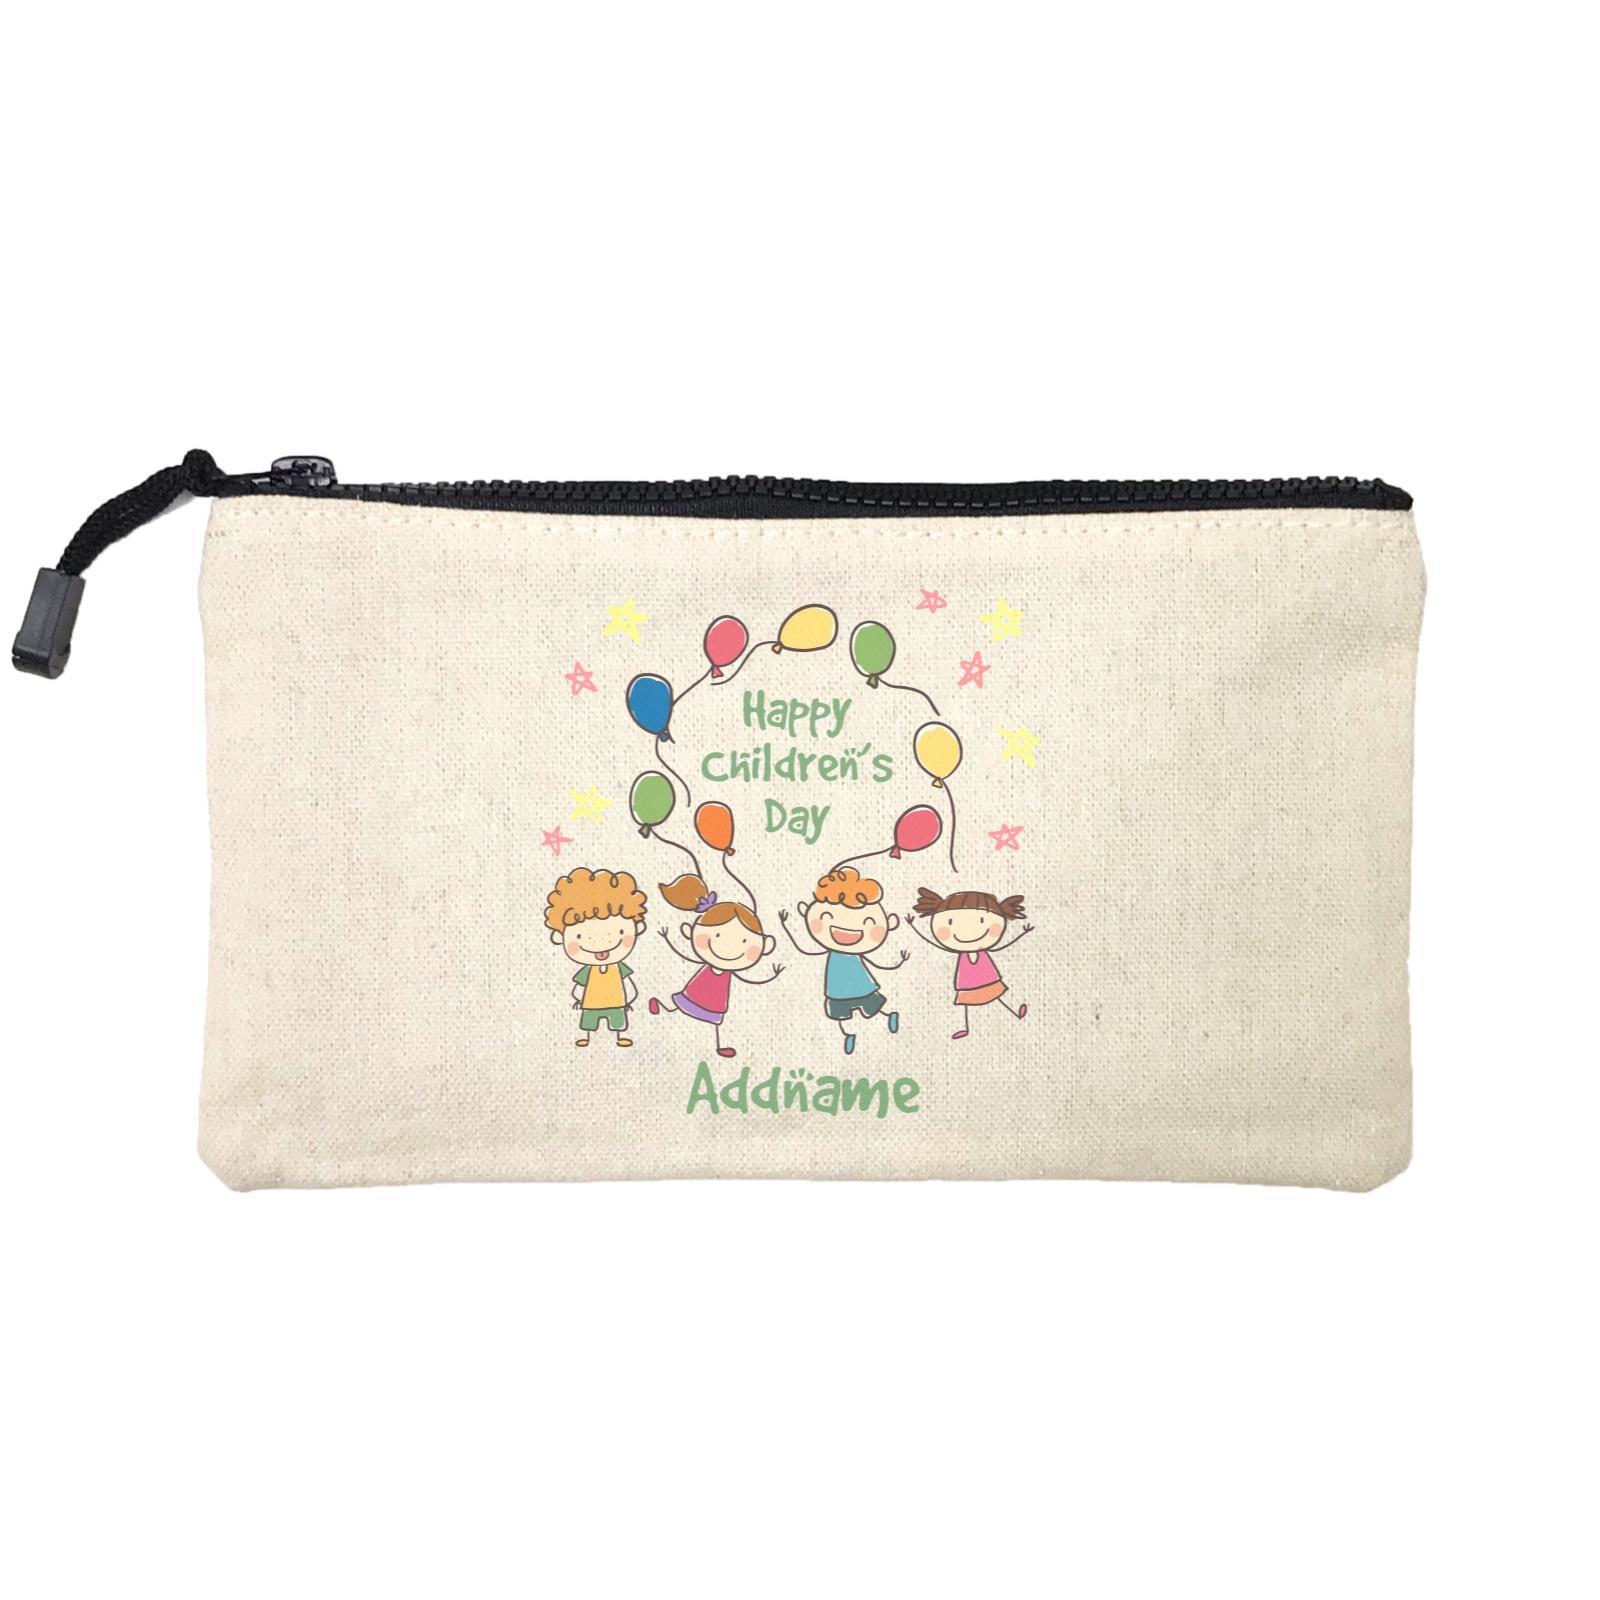 Children's Day Gift Series Four Cute Children With Balloons Addname SP Stationery Pouch